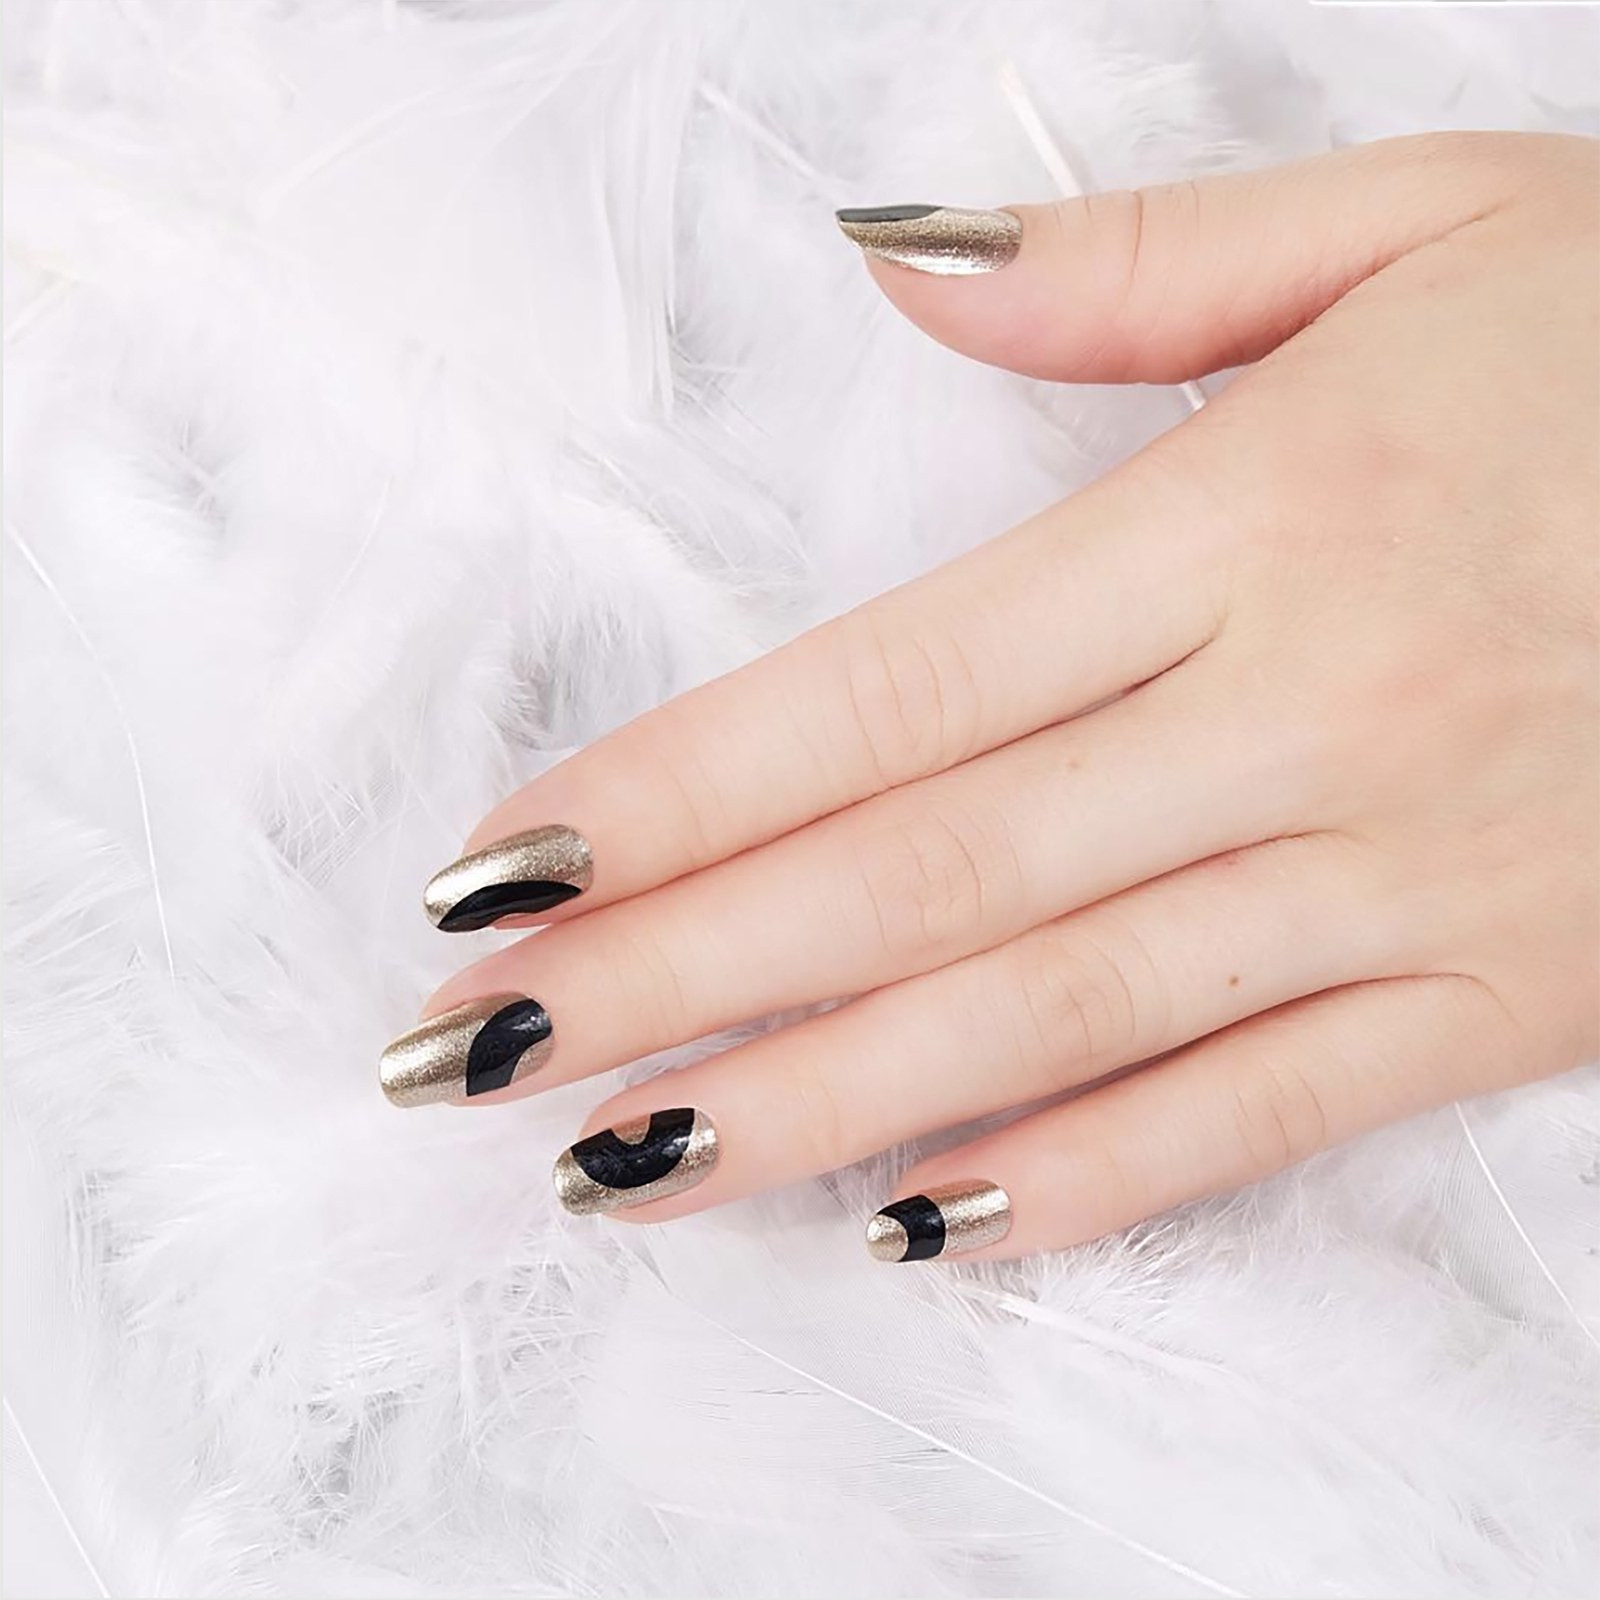 Pretty Nails Escondido
 Best Nail Salons In San Marcos Ca Nail Ftempo